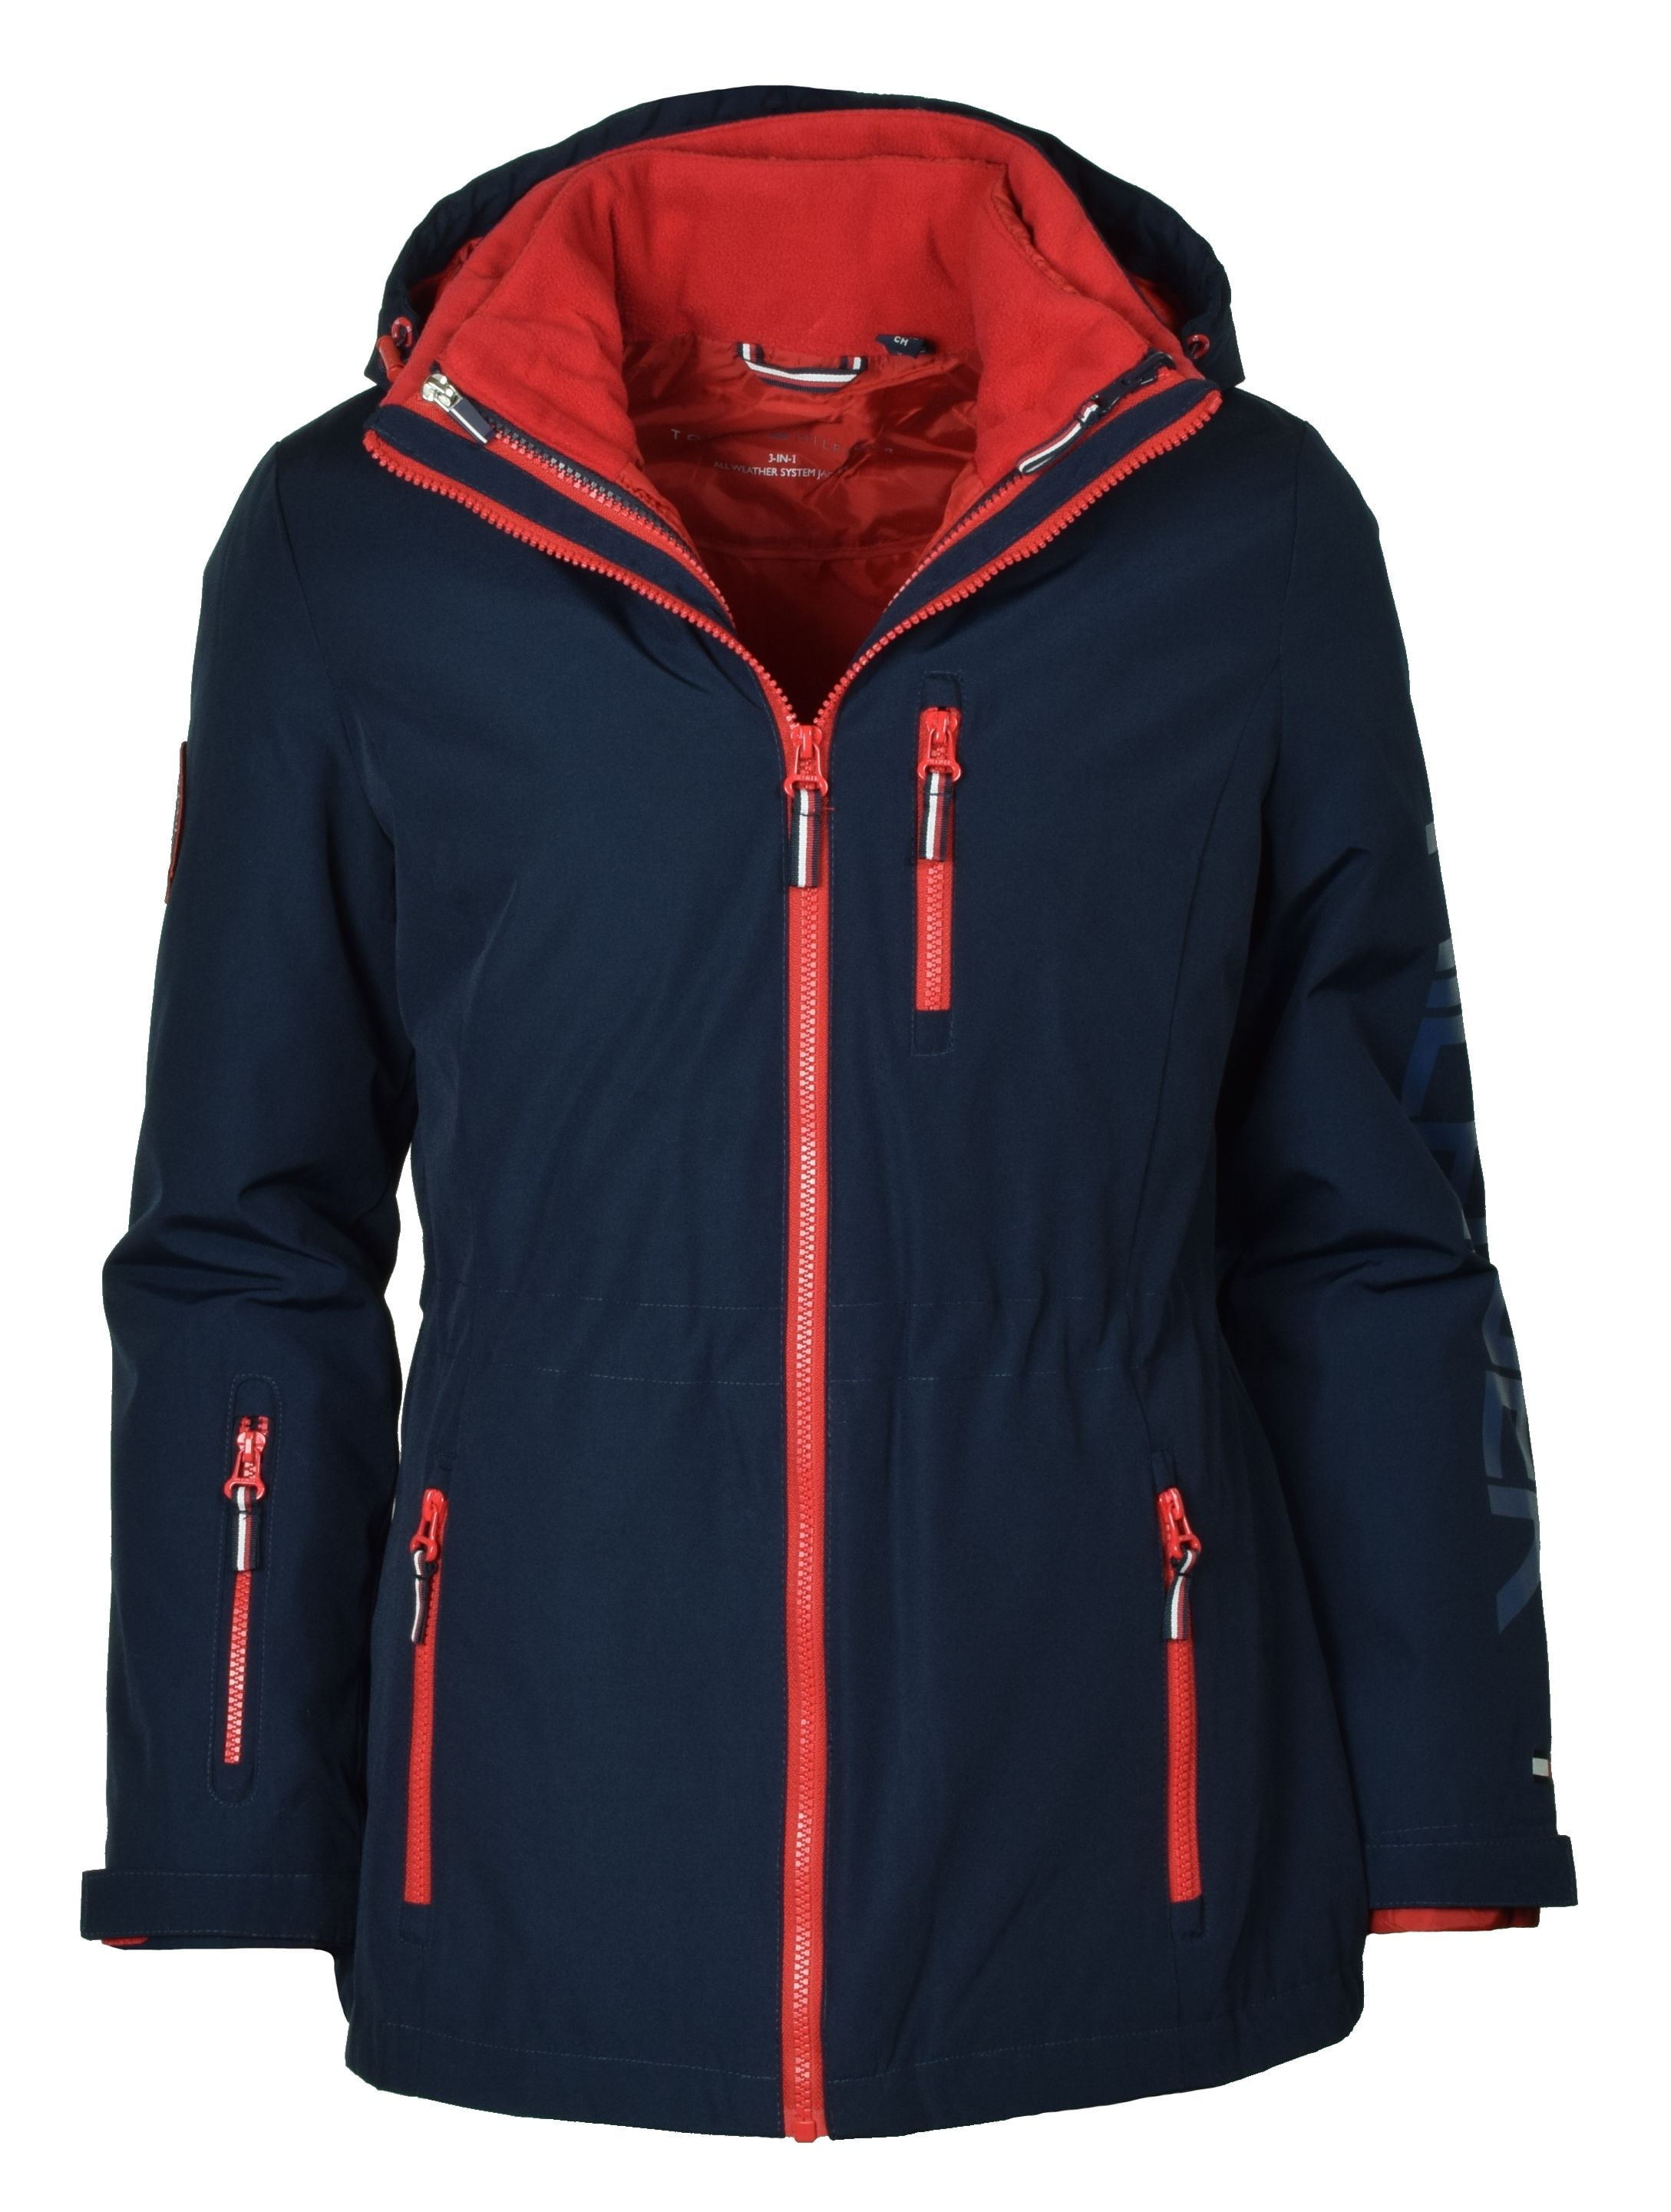 Tommy Hilfiger Women's 3-in-1 Systems Jacket 